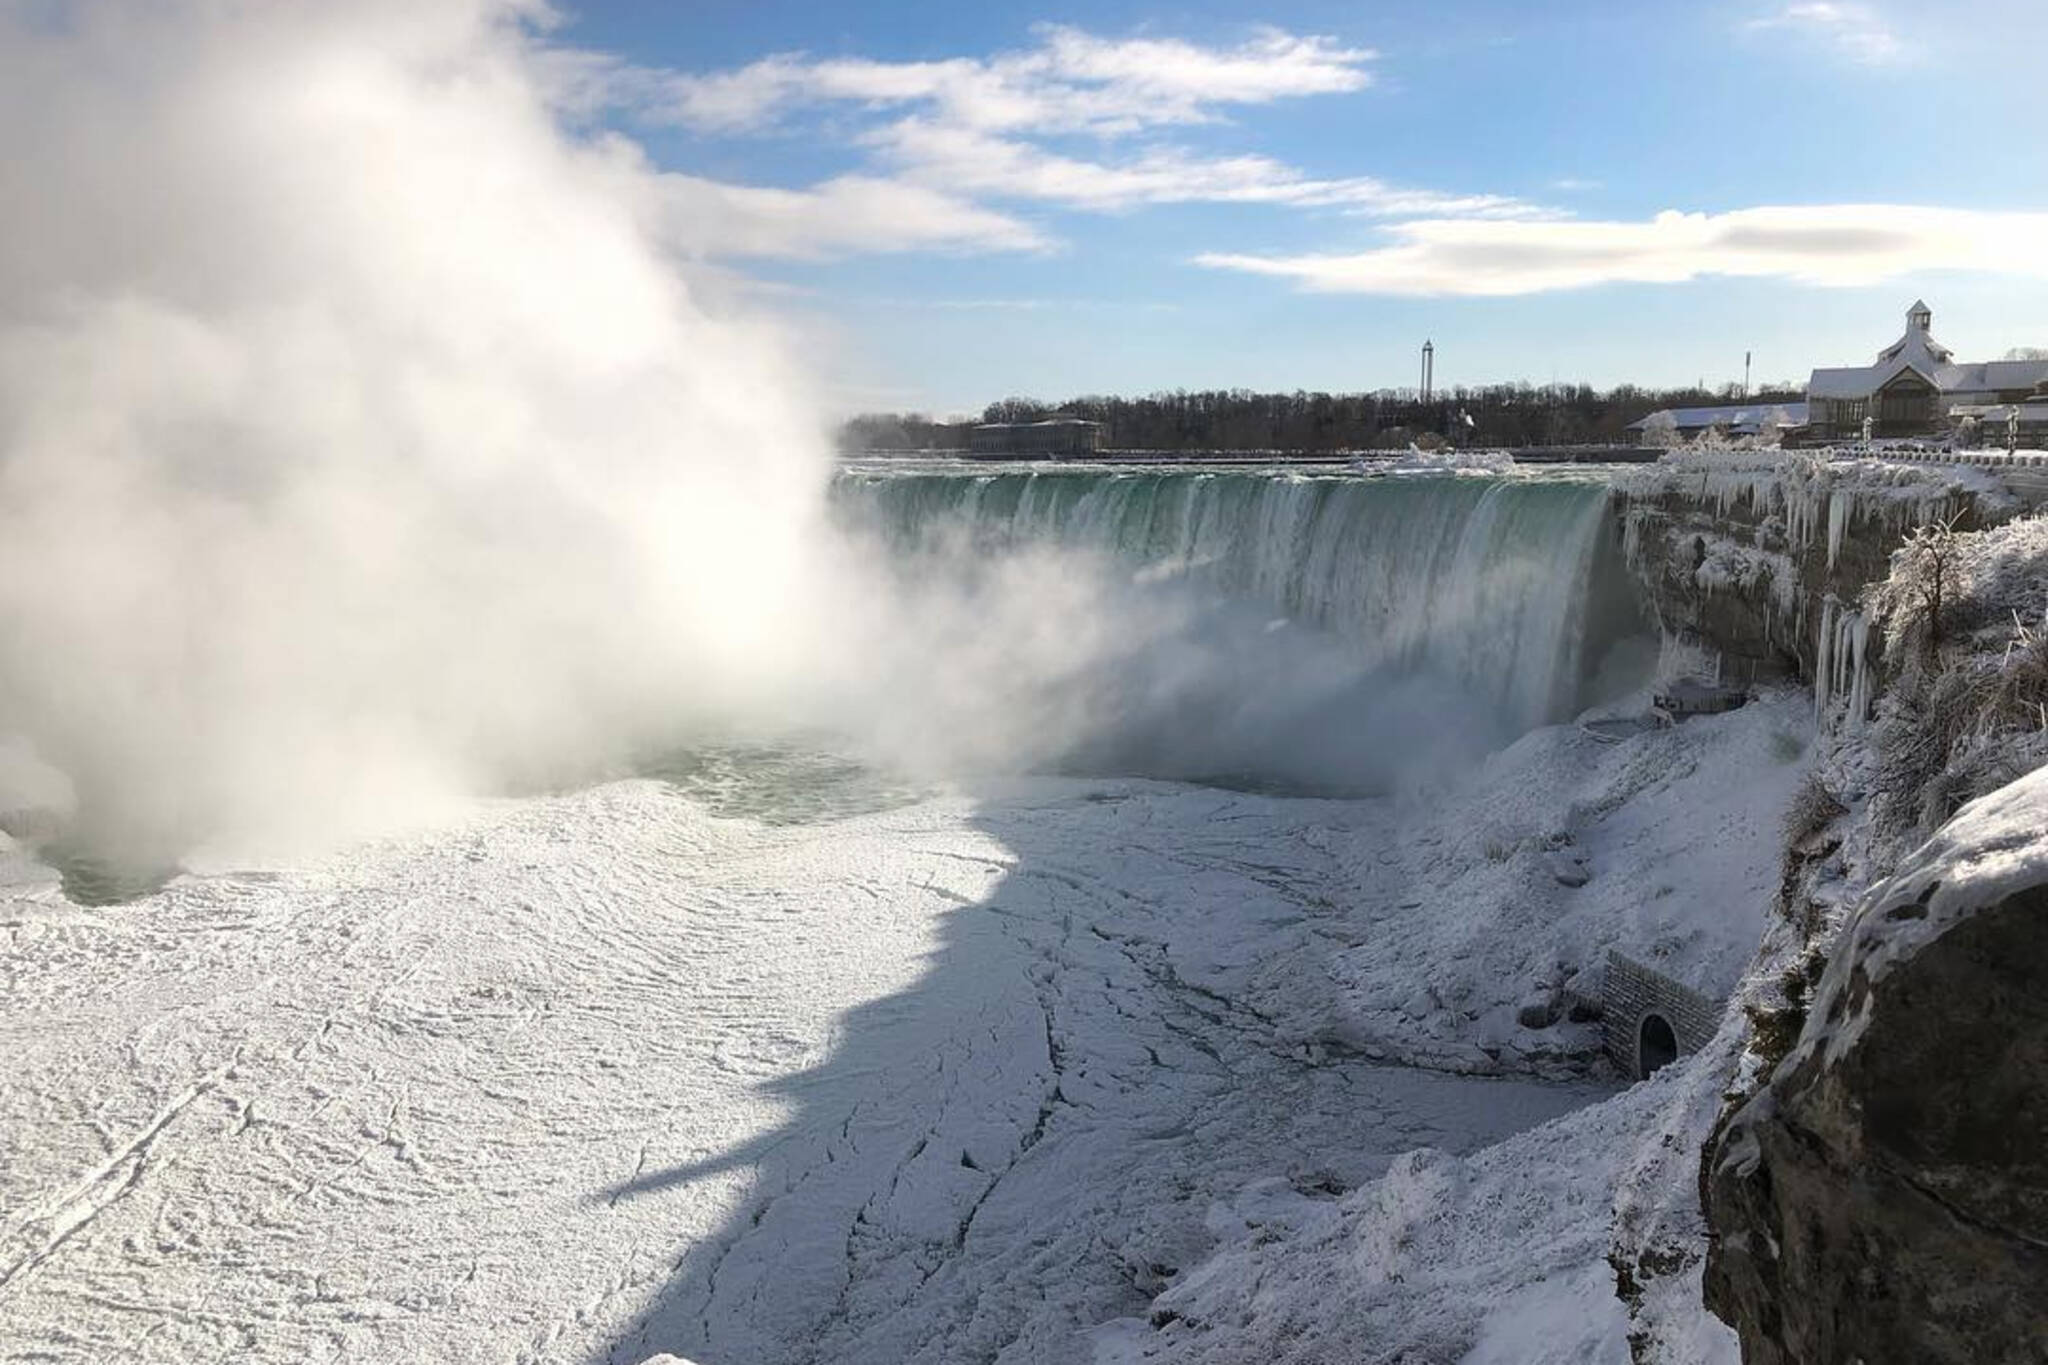 Niagara Falls has frozen over and it is beautiful